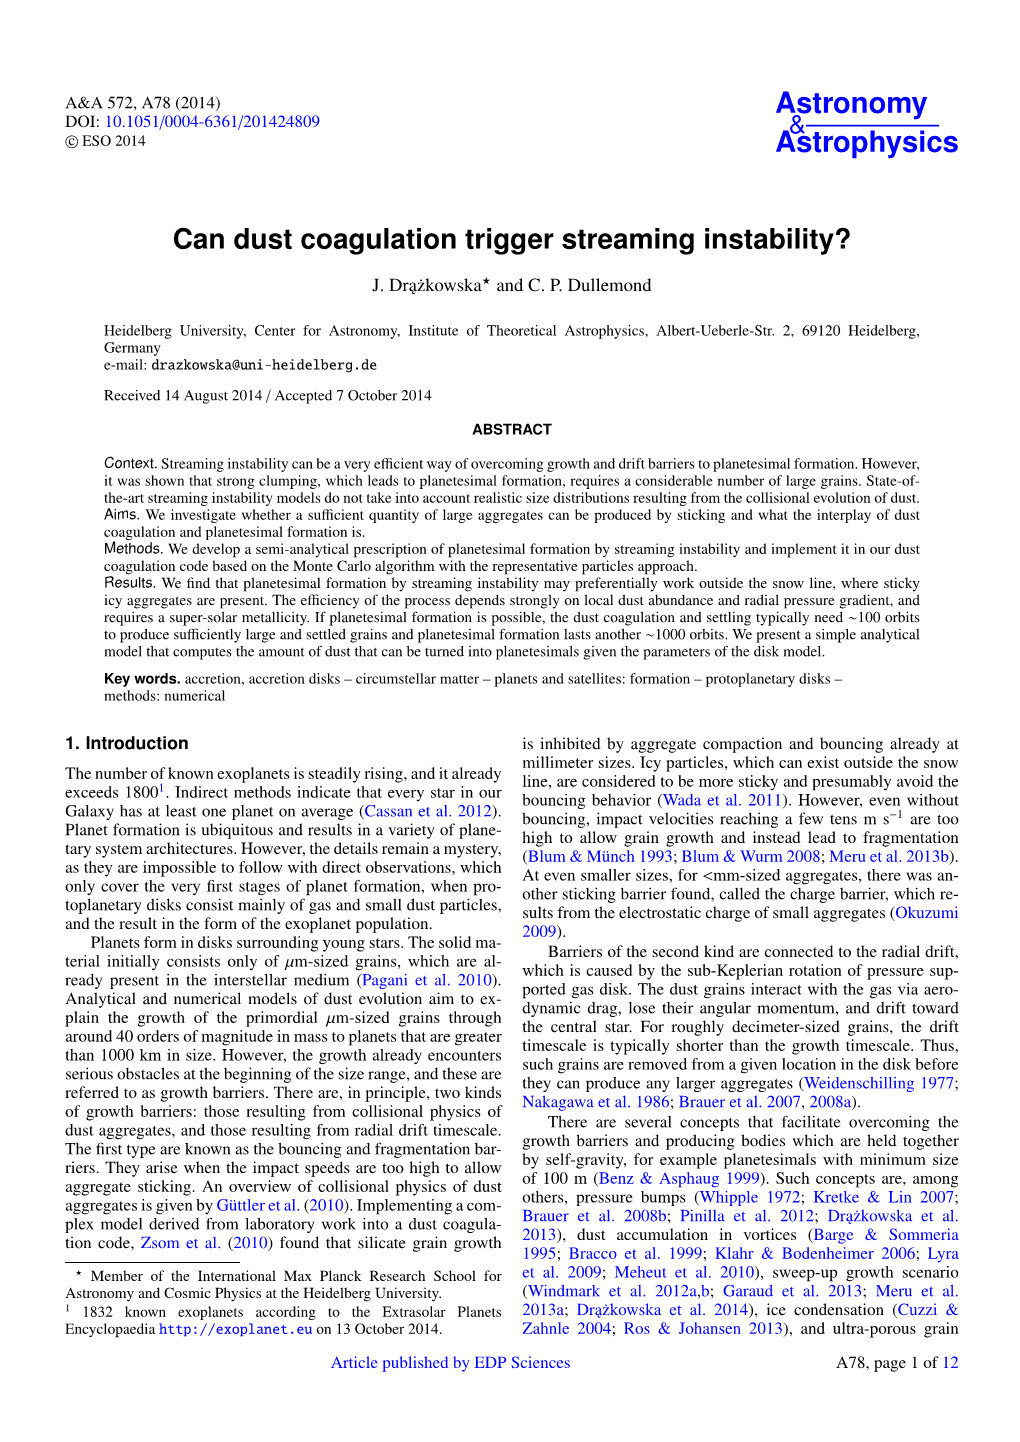 Can Dust Coagulation Trigger Streaming Instability?